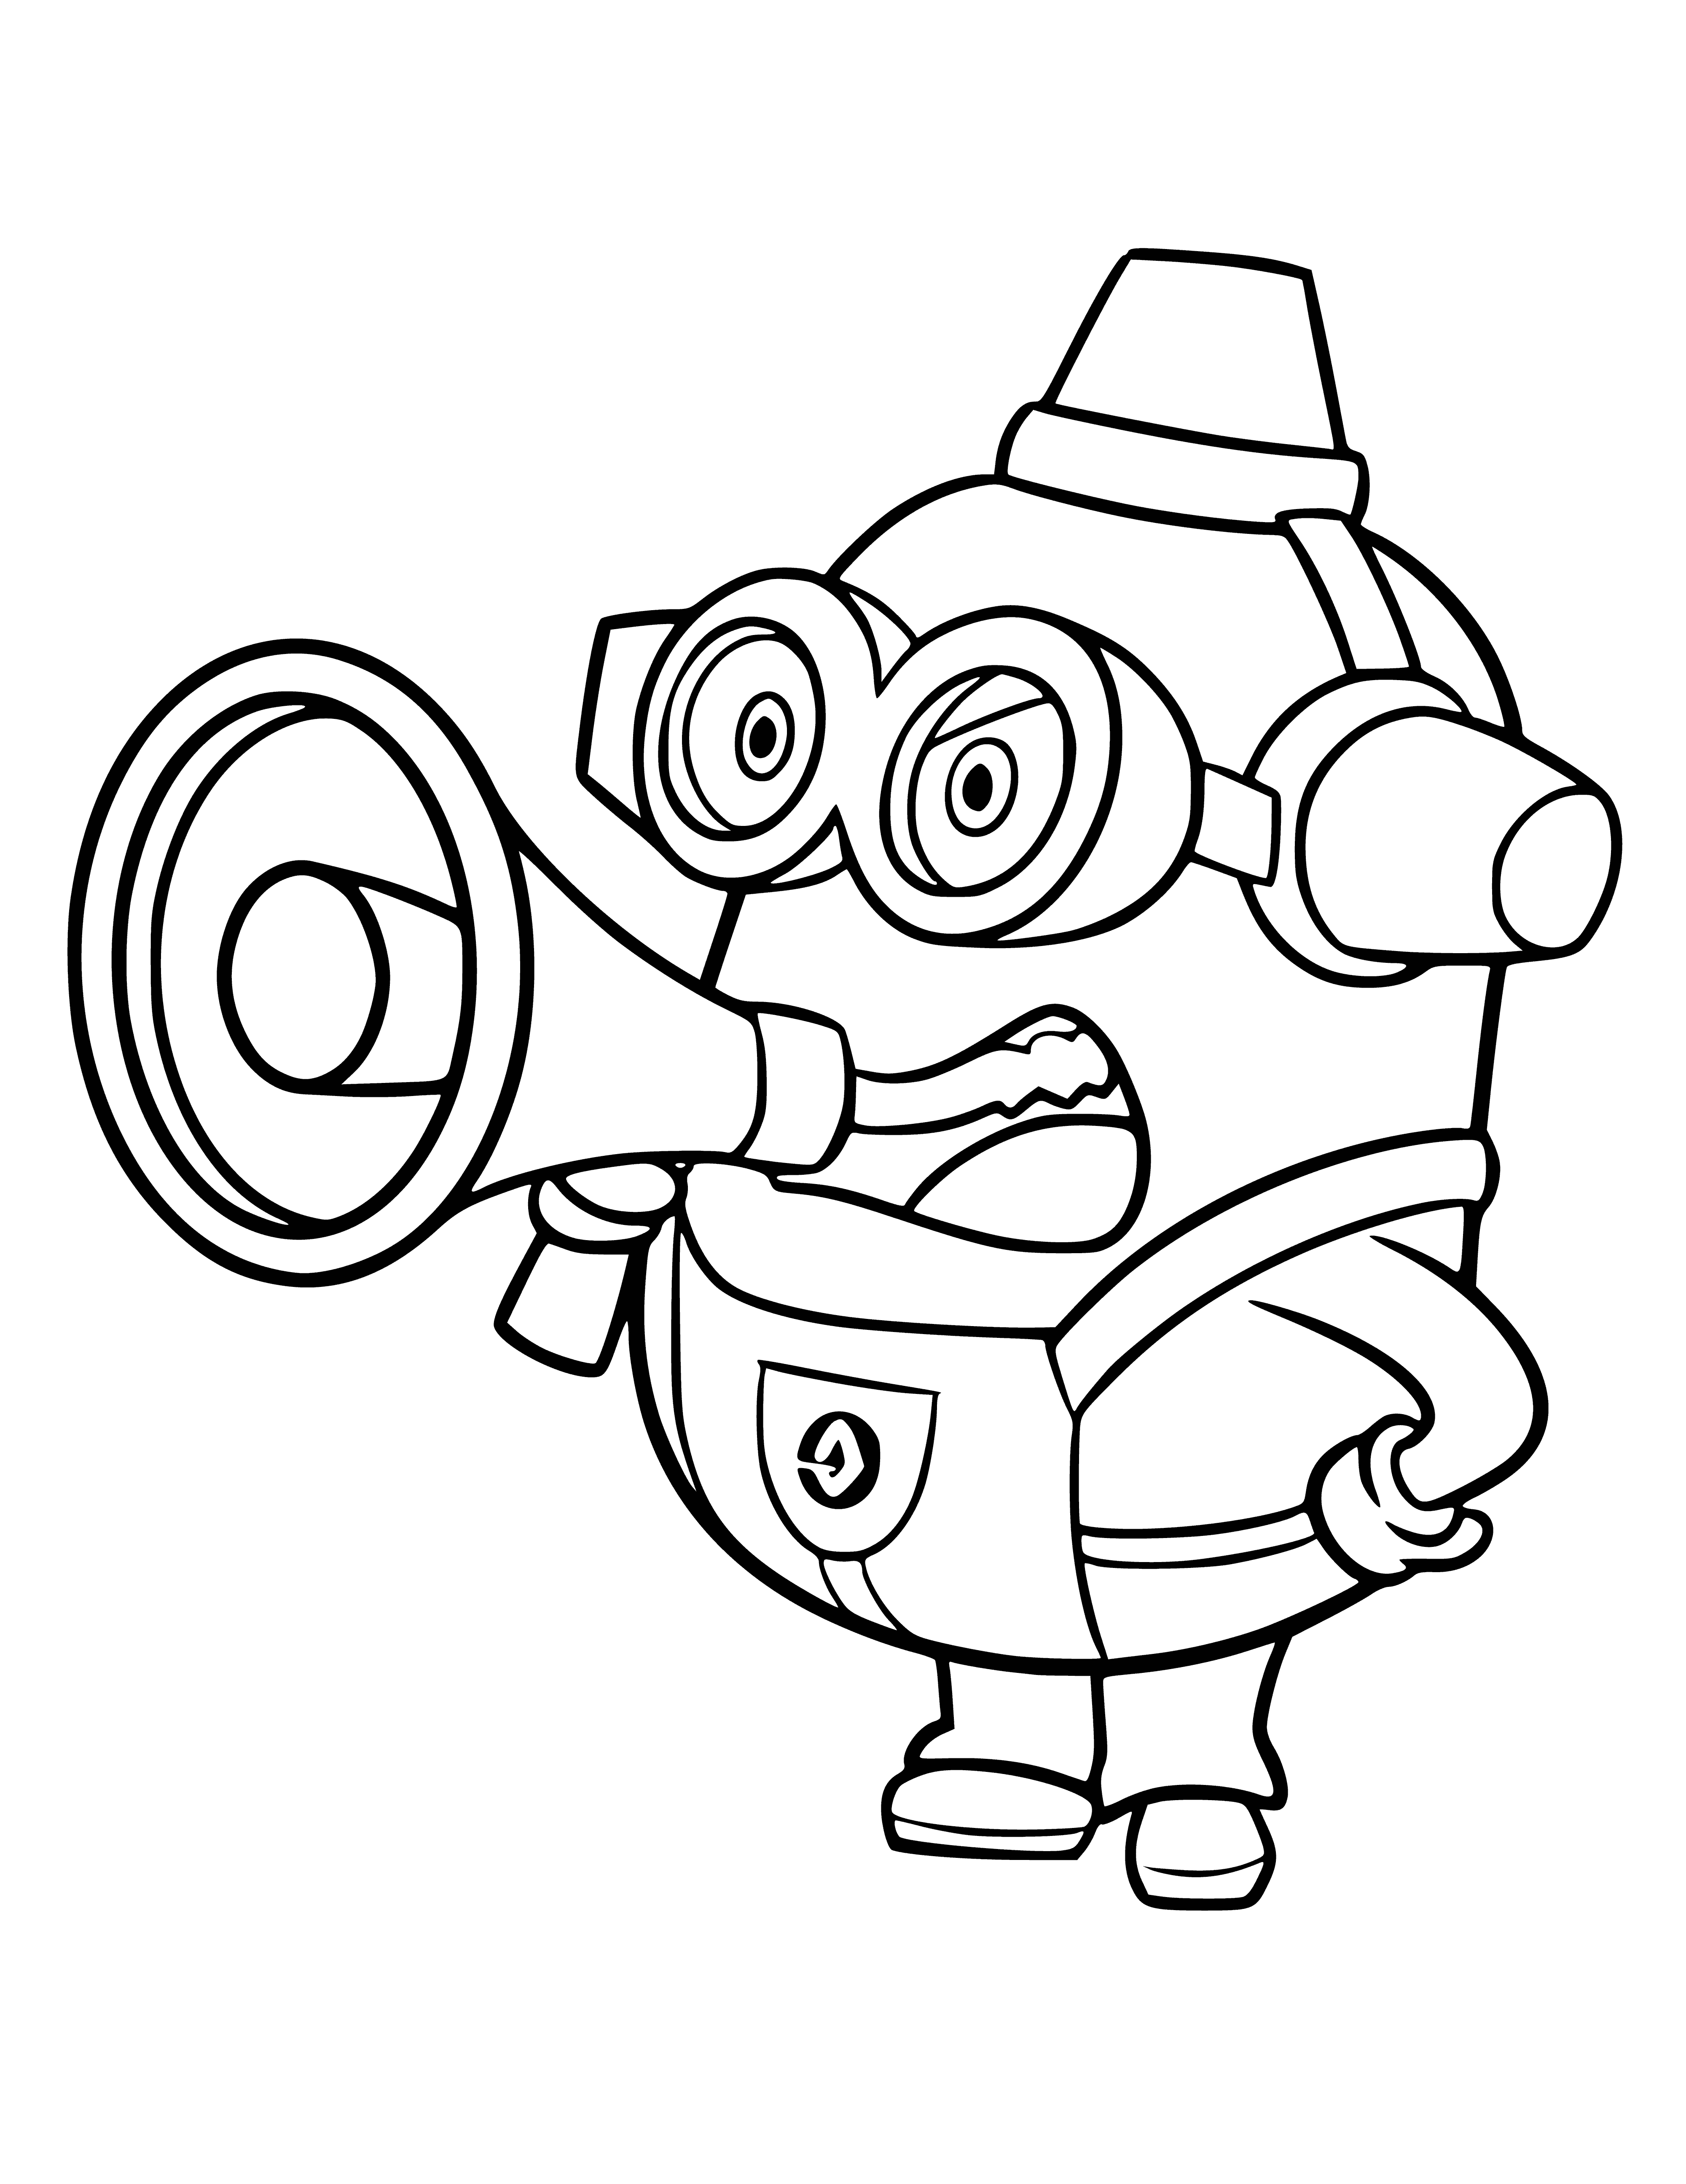 Minion with a horn coloring page